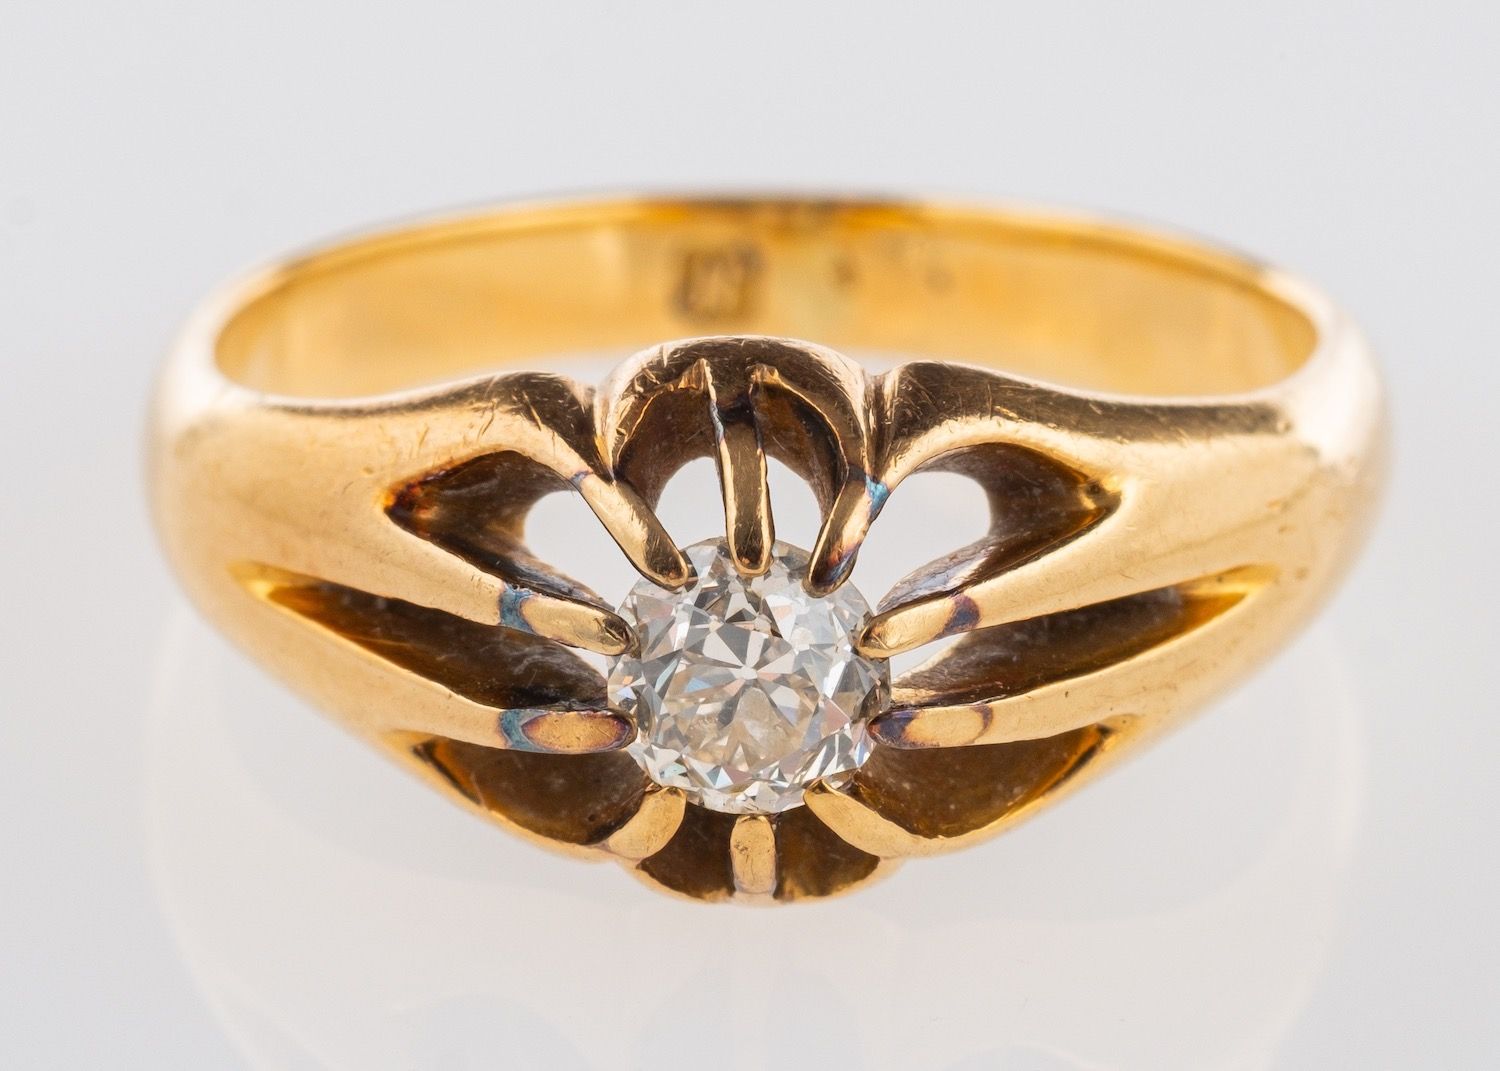 An antique single stone ring, set with an old European-cut diamond in a 'gypsy' style setting,